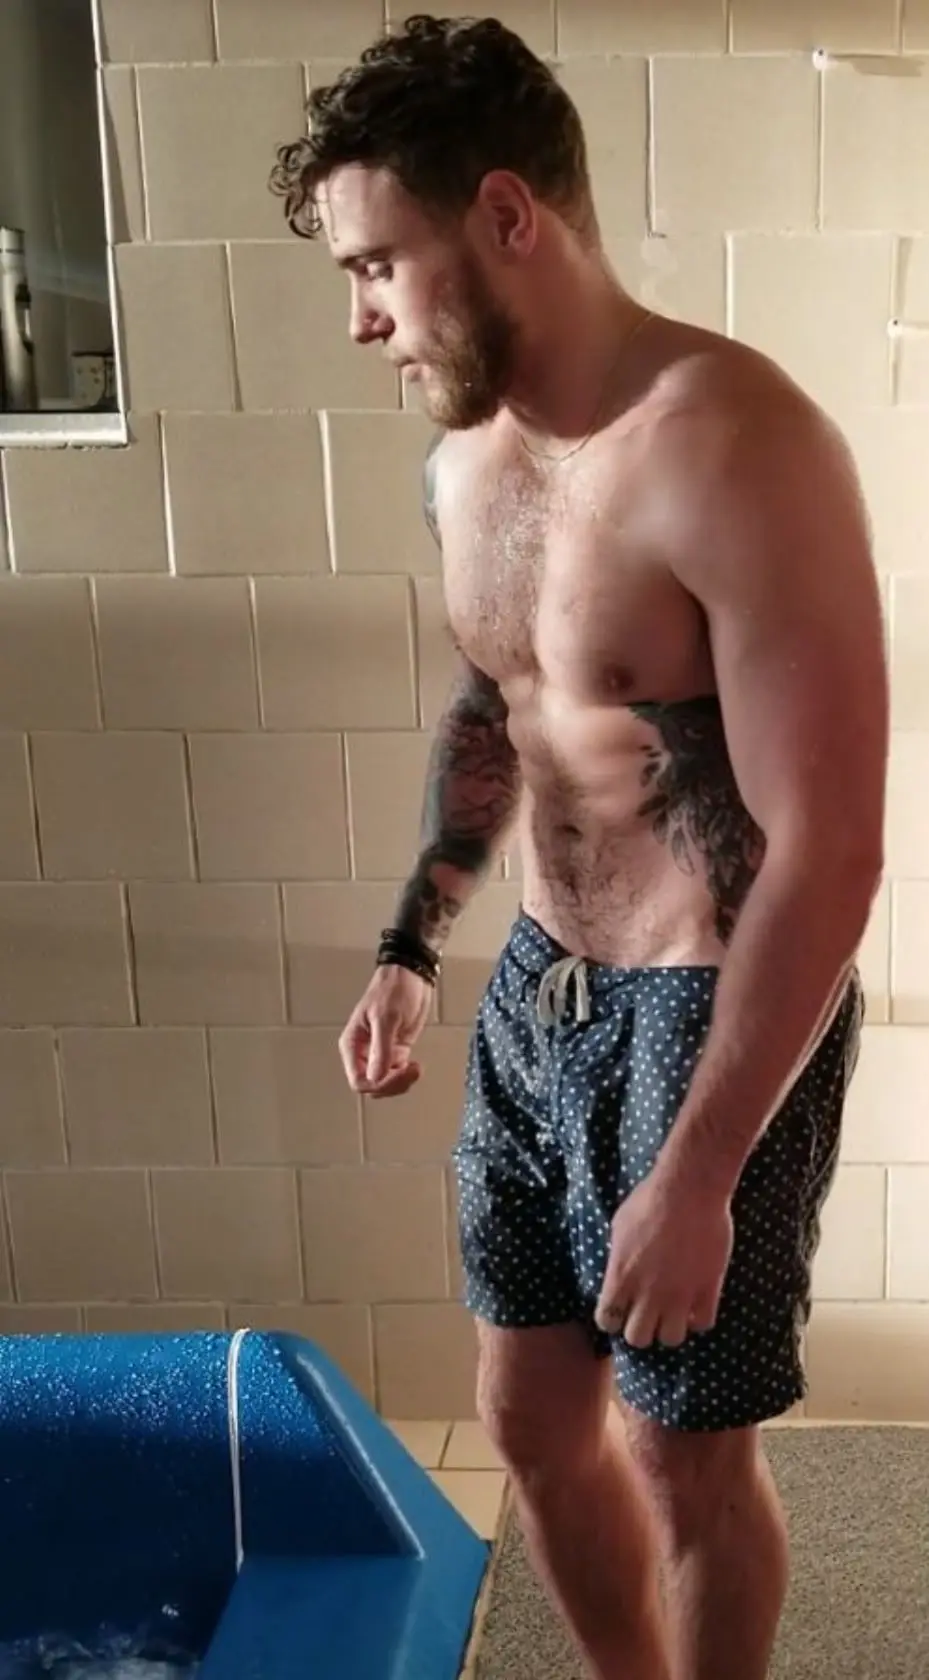 Gus Kenworthy sexy nude pic